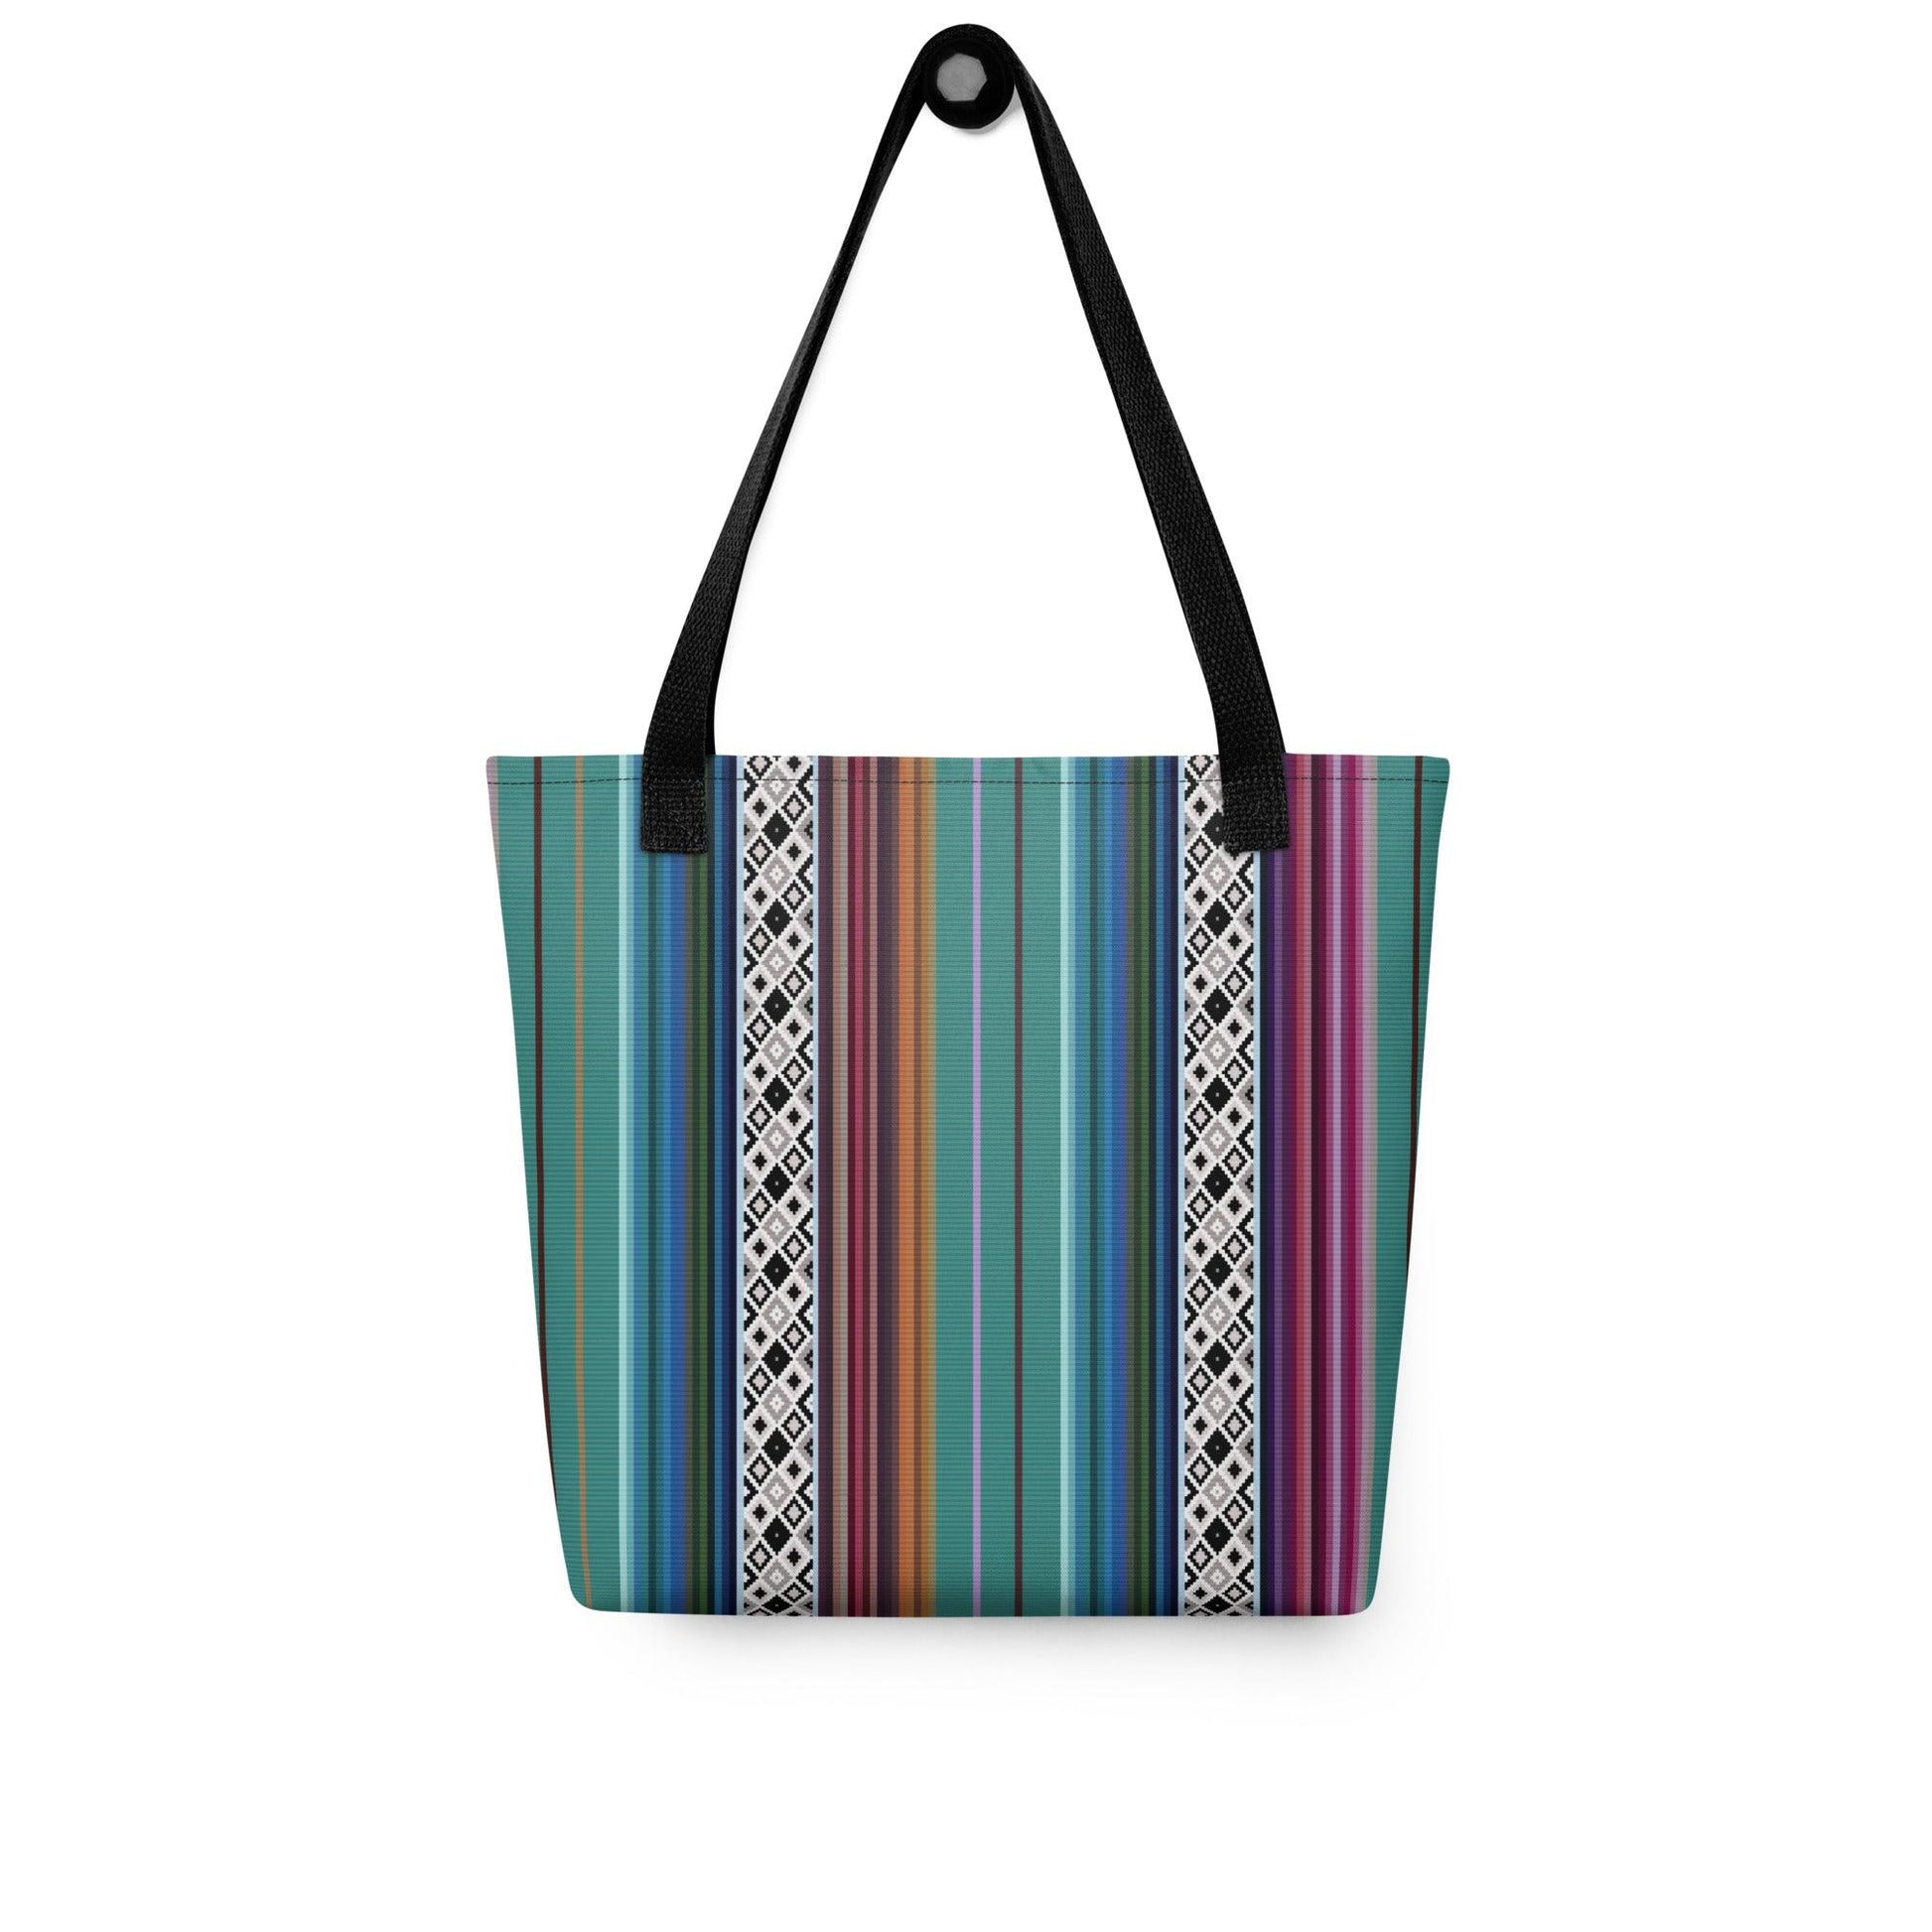 Mexican Aztec Print Tote Bag - The Global Wanderer